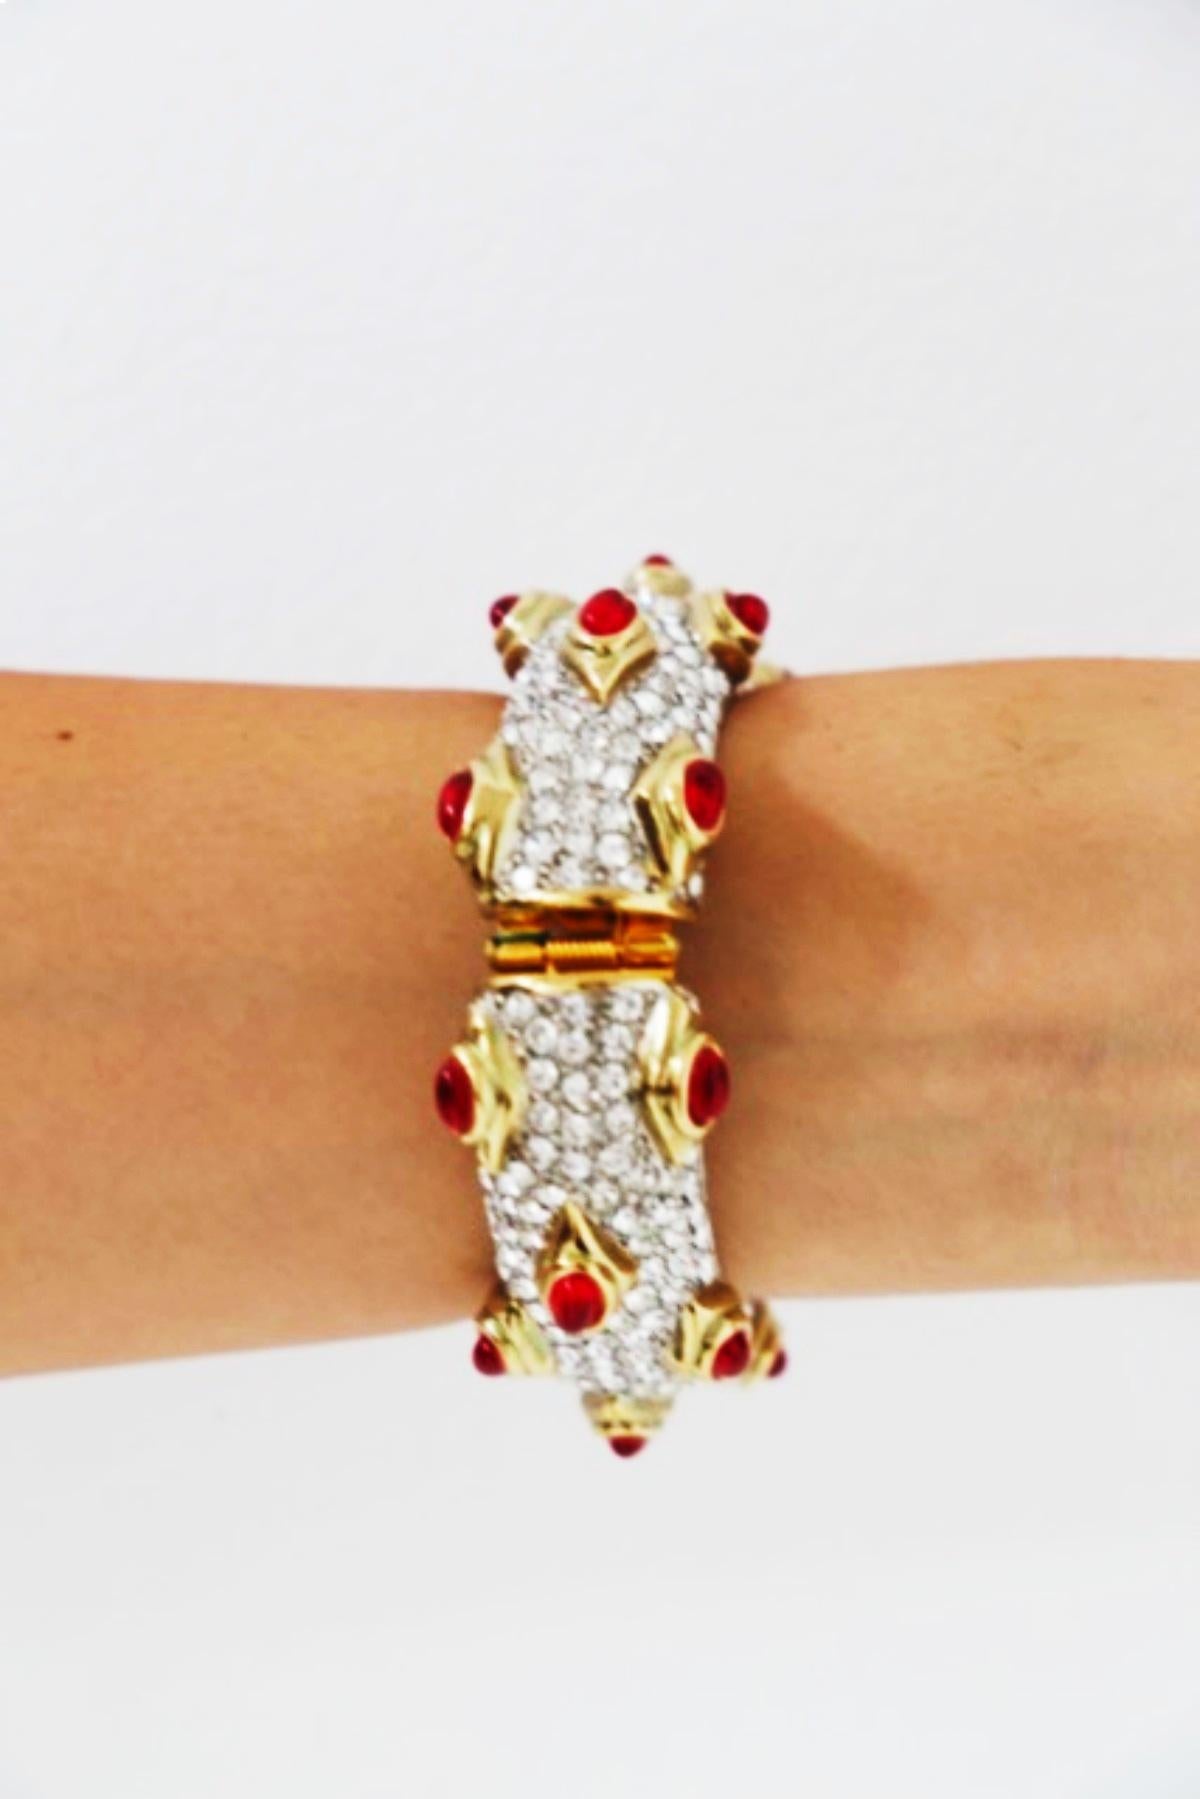 Kenneth Lane Gold Bracelet with Red Stones For Sale 1